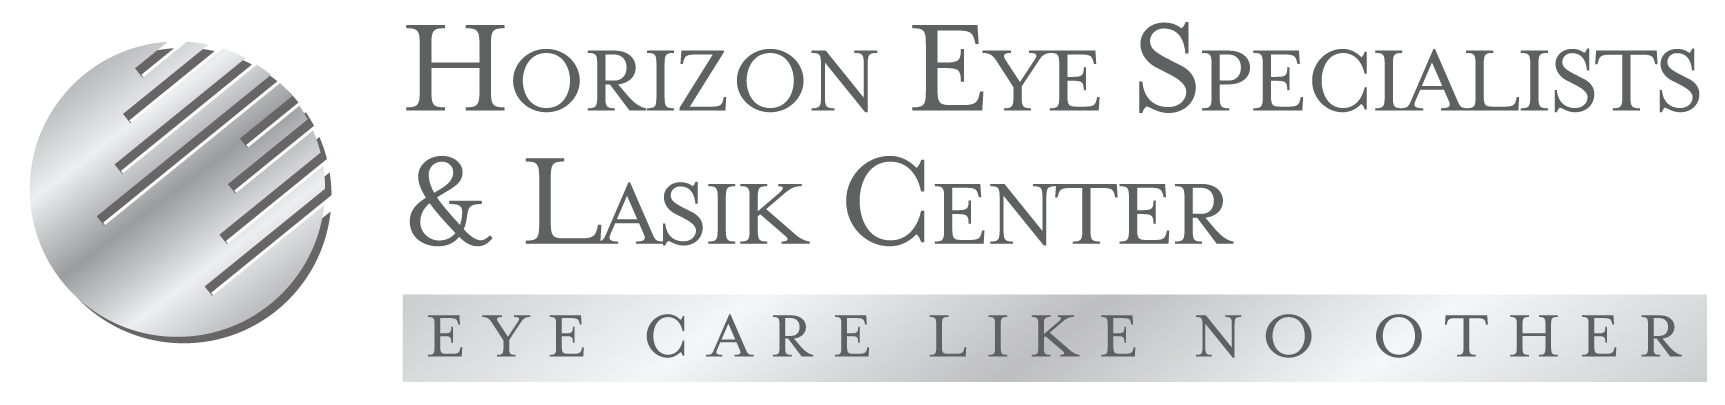 Horizon Eye Specialists and Lasik Center.png